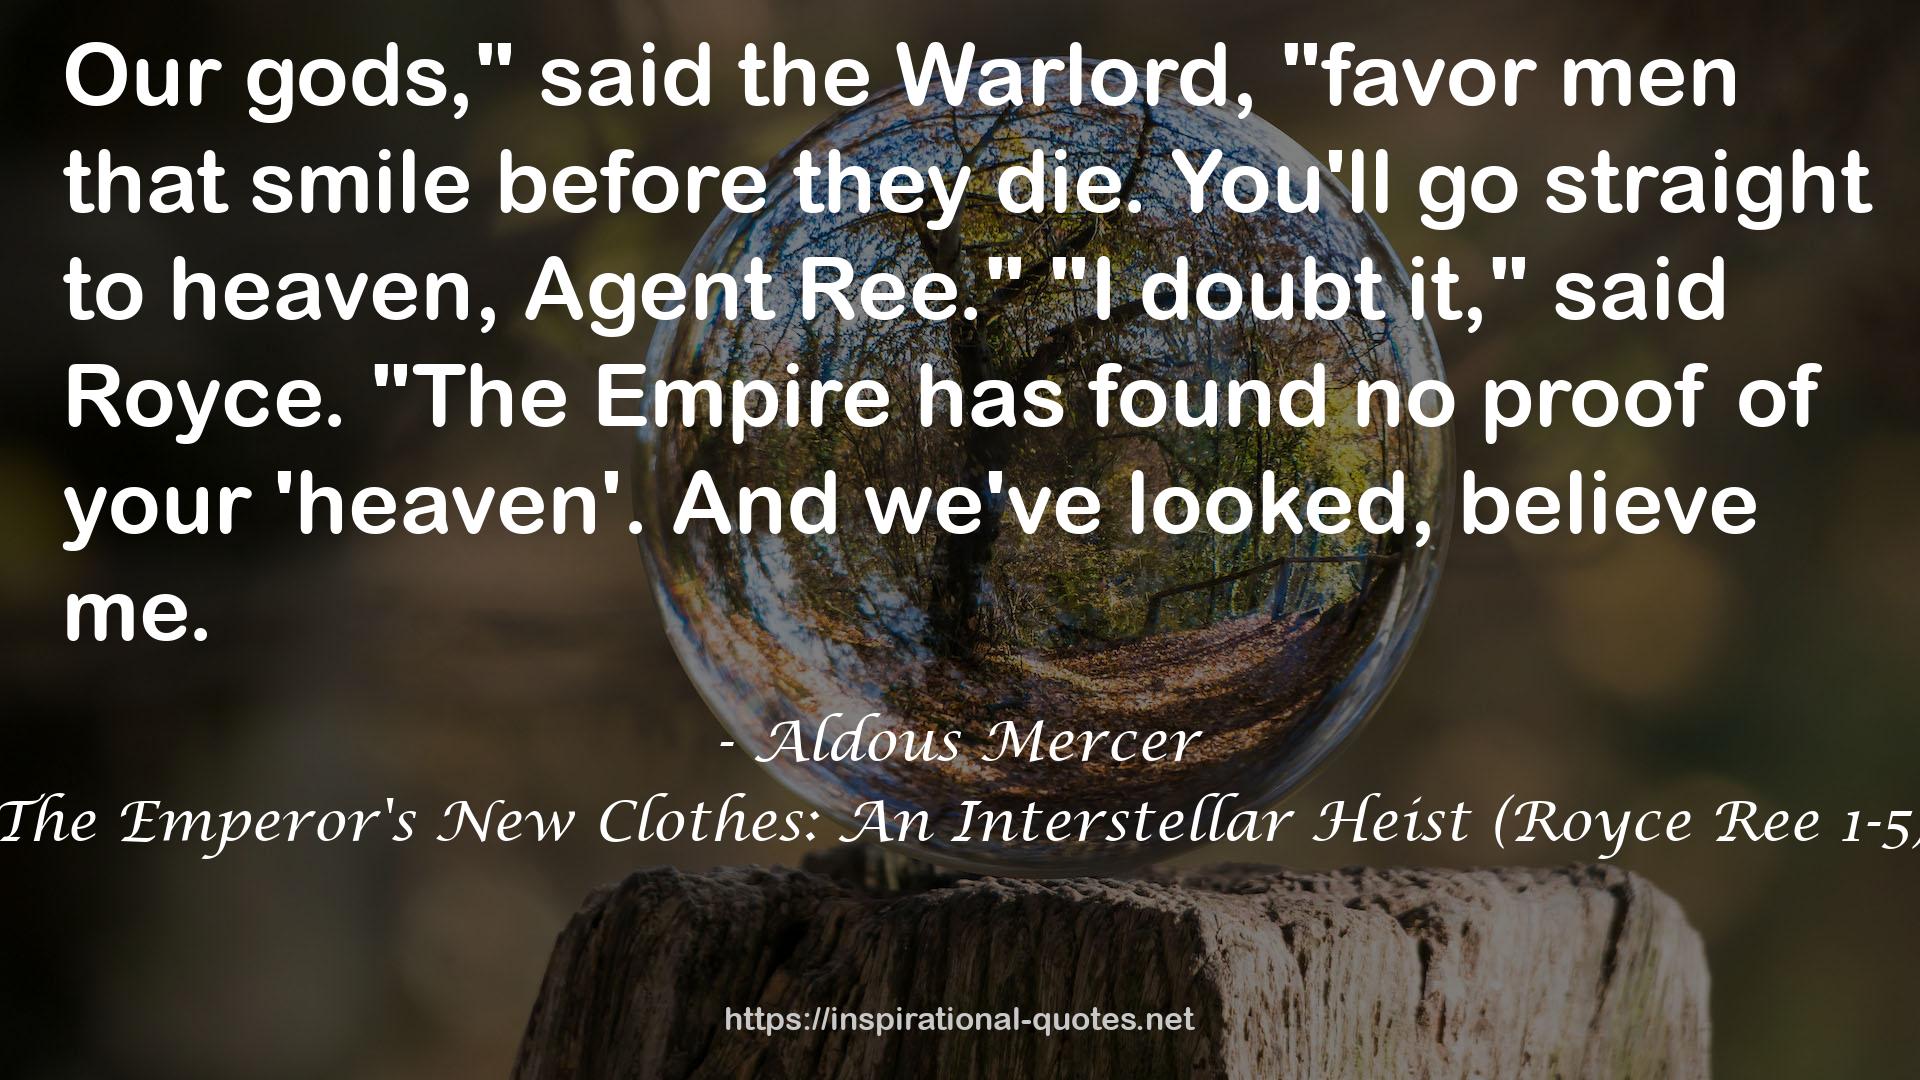 The Emperor's New Clothes: An Interstellar Heist (Royce Ree 1-5) QUOTES